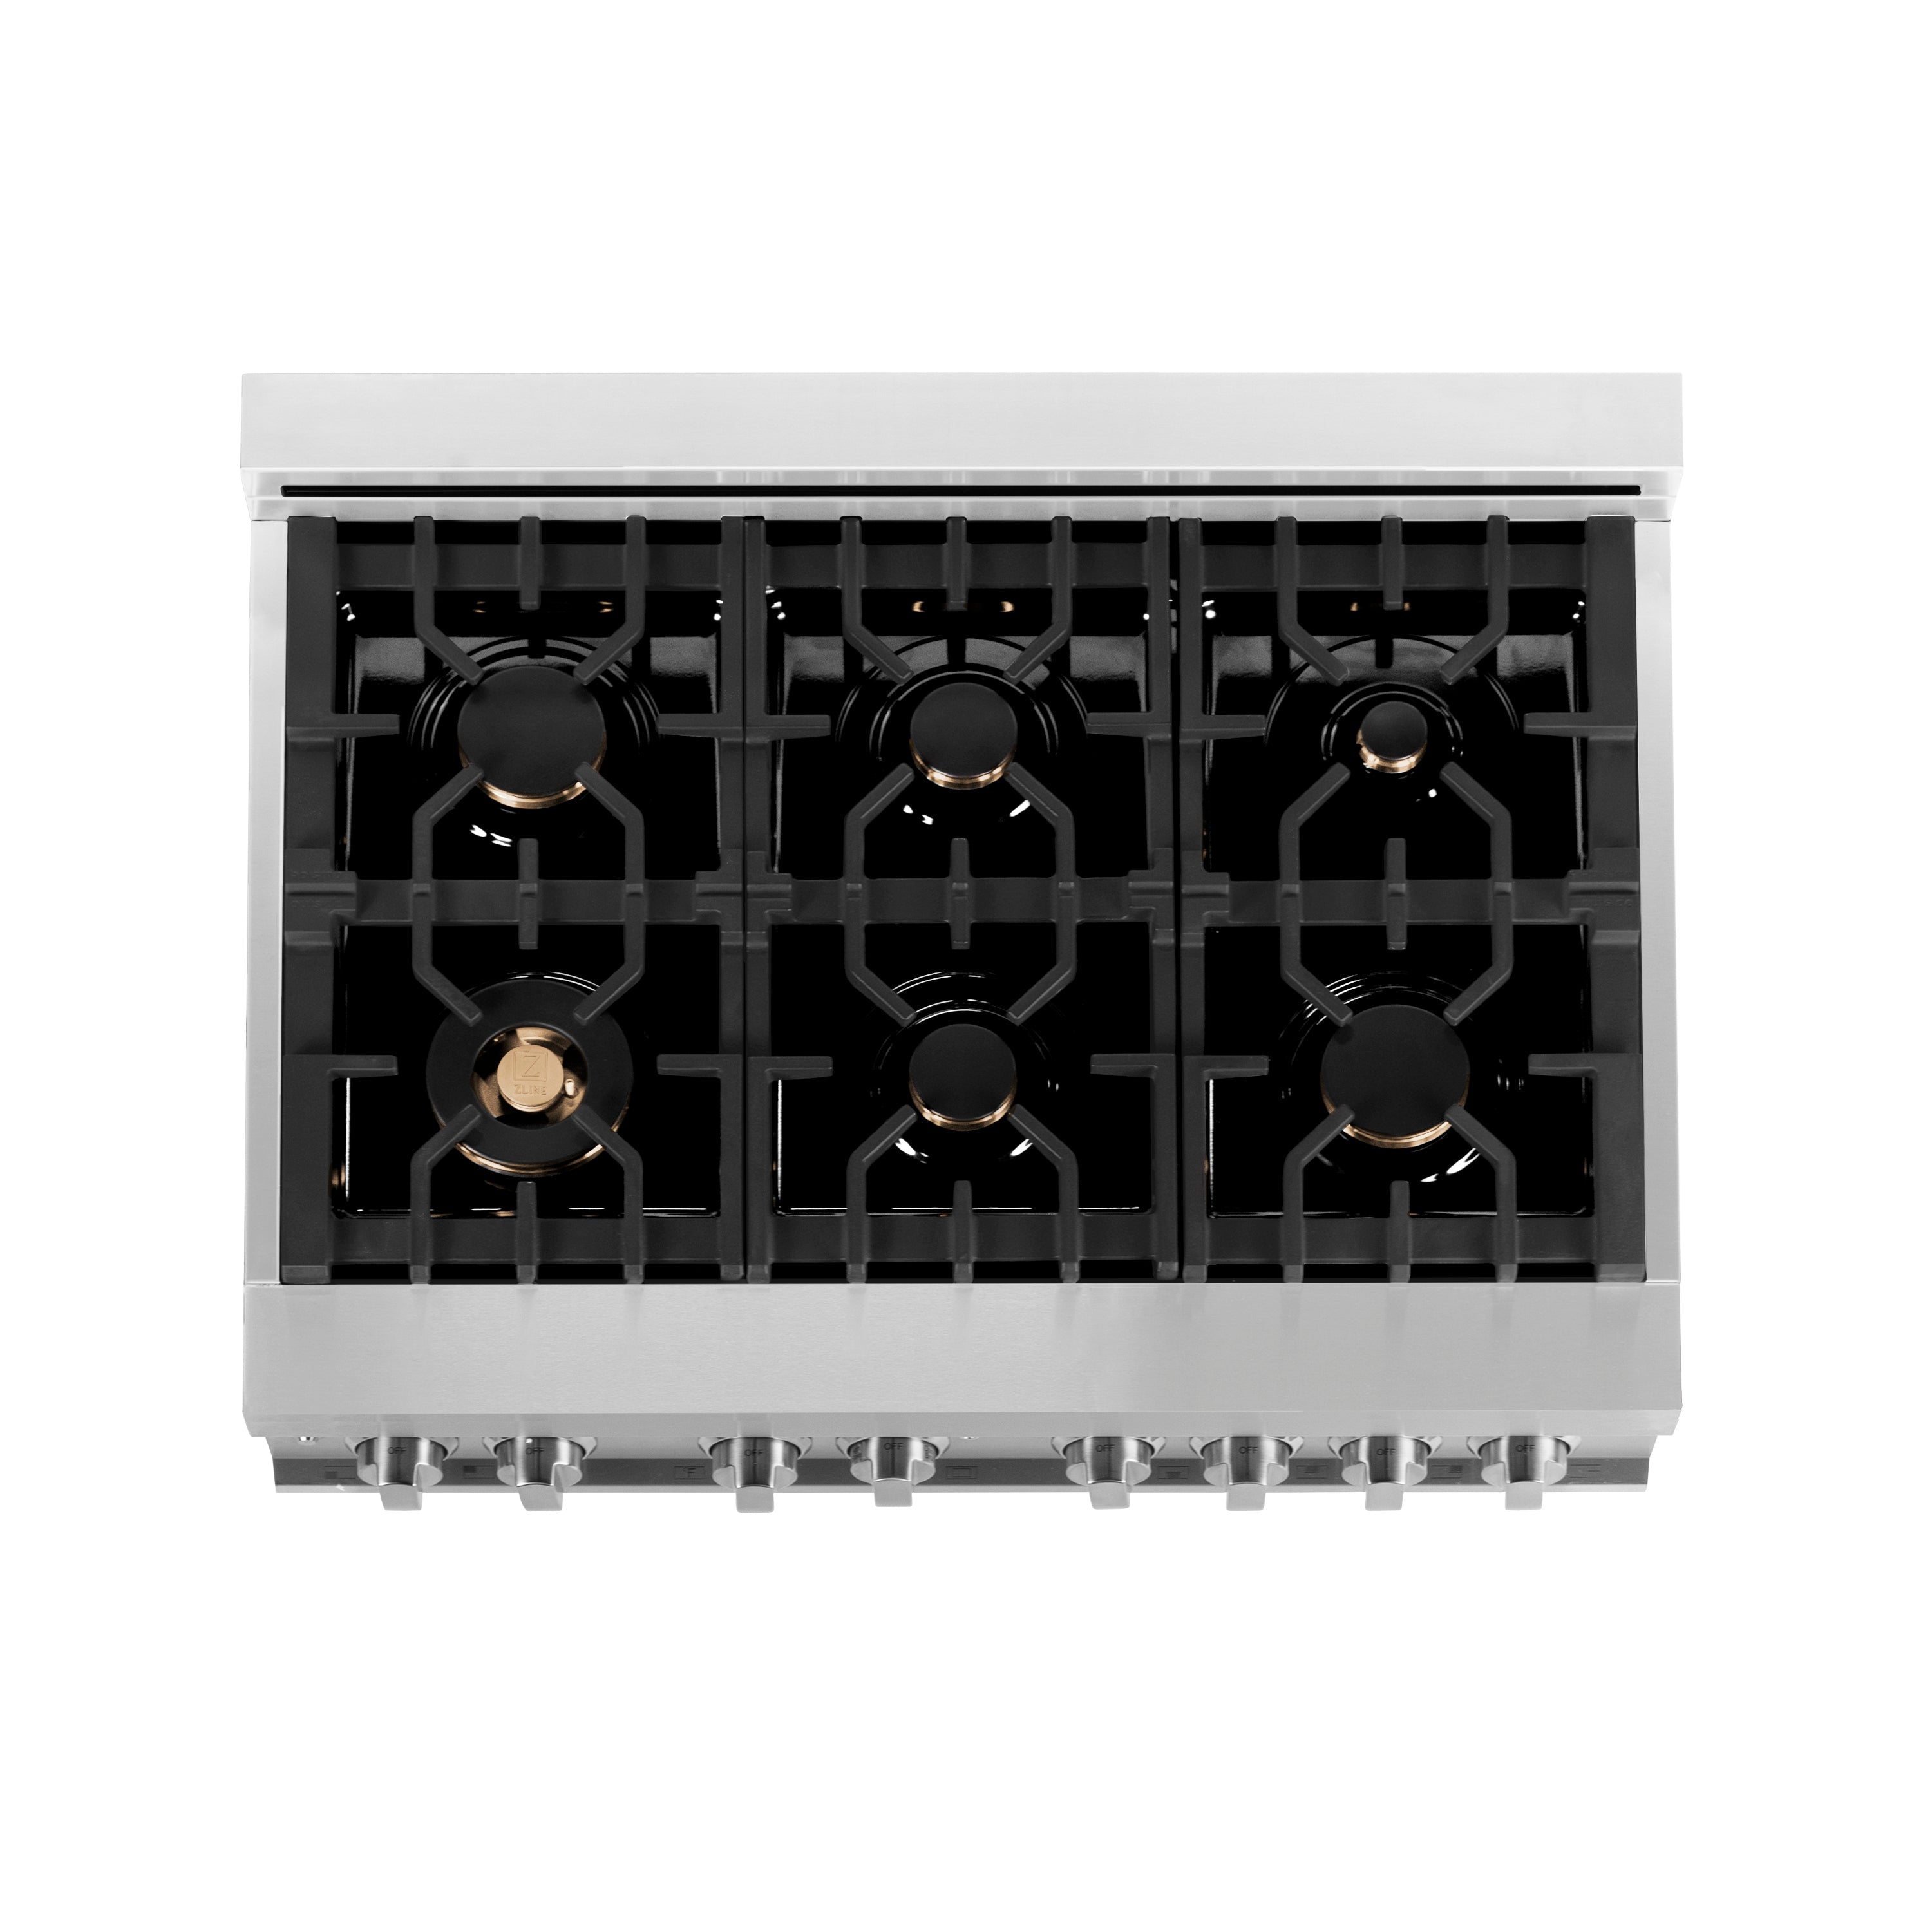 ZLINE 36" 4.6 cu. ft. Electric Oven and Gas Cooktop Dual Fuel Range with Griddle and Brass Burners in Stainless Steel (RA-BR-GR-36)